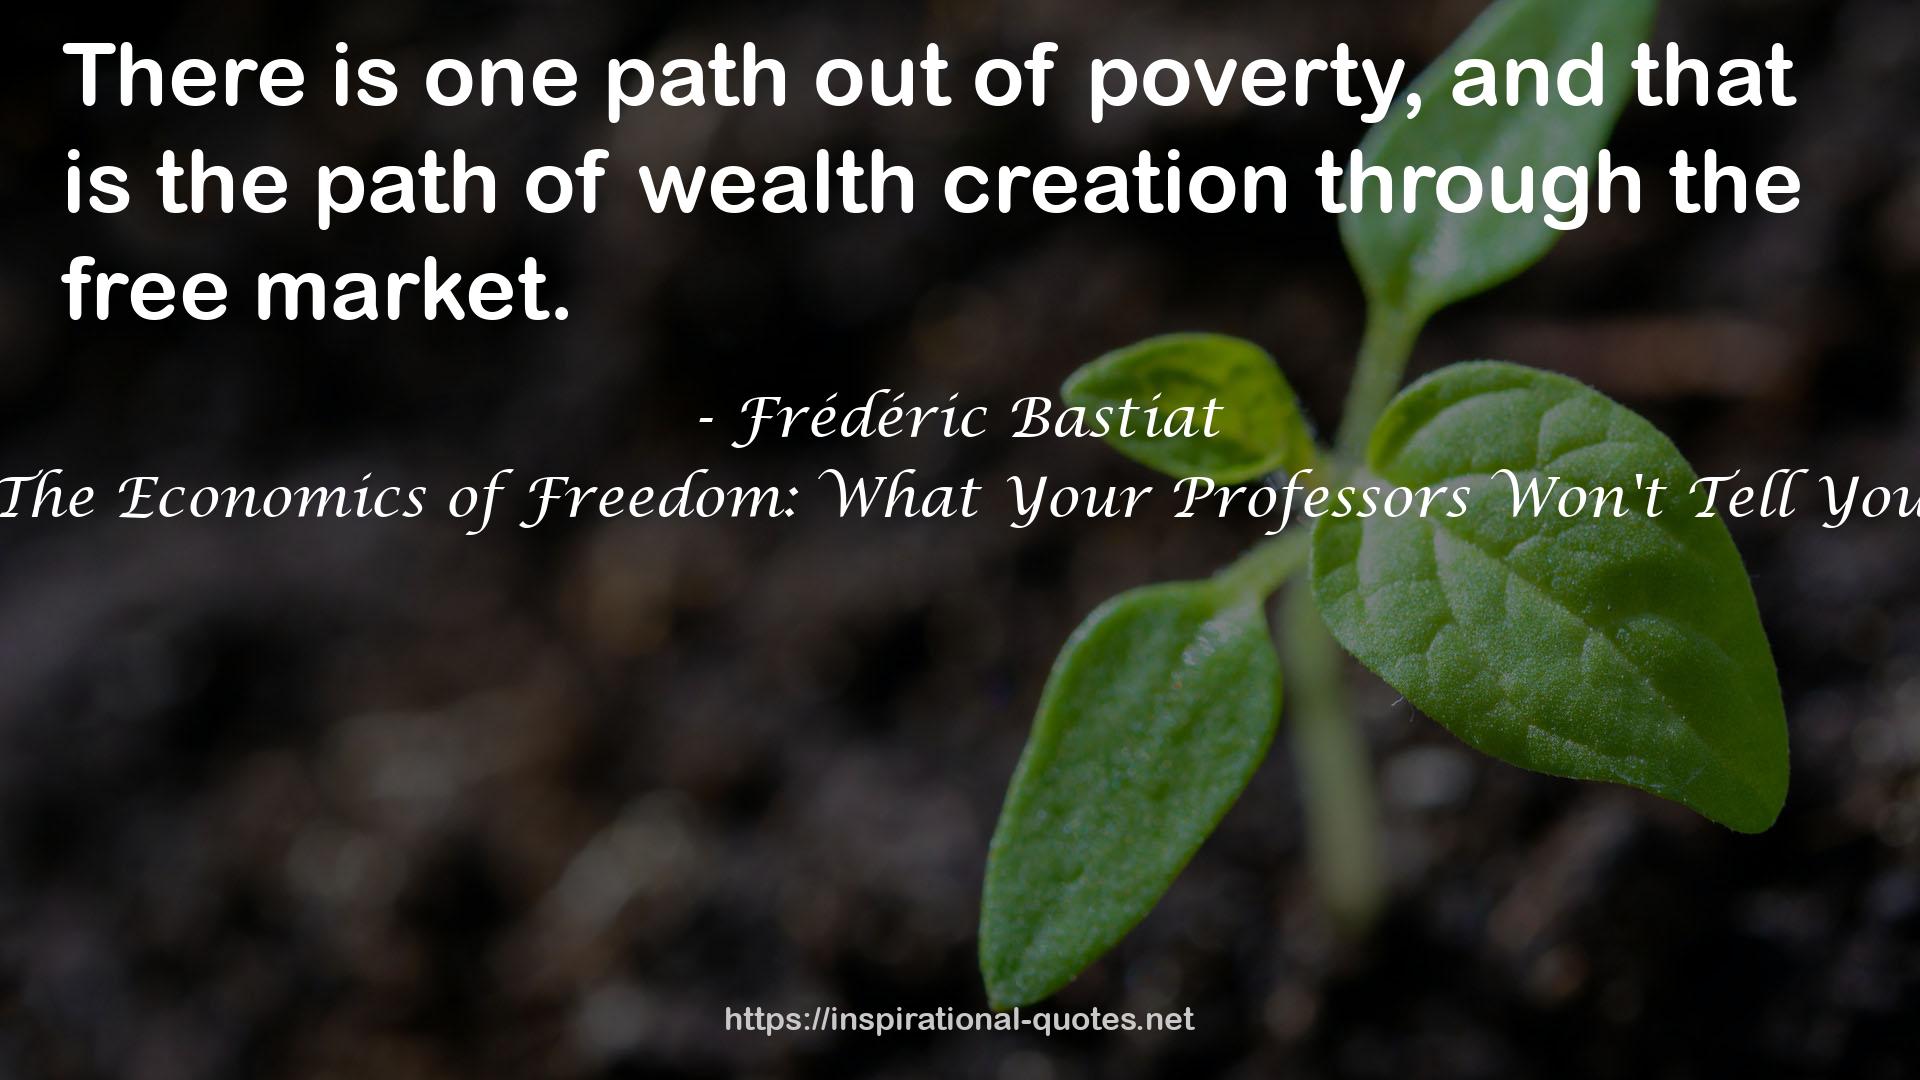 The Economics of Freedom: What Your Professors Won't Tell You QUOTES